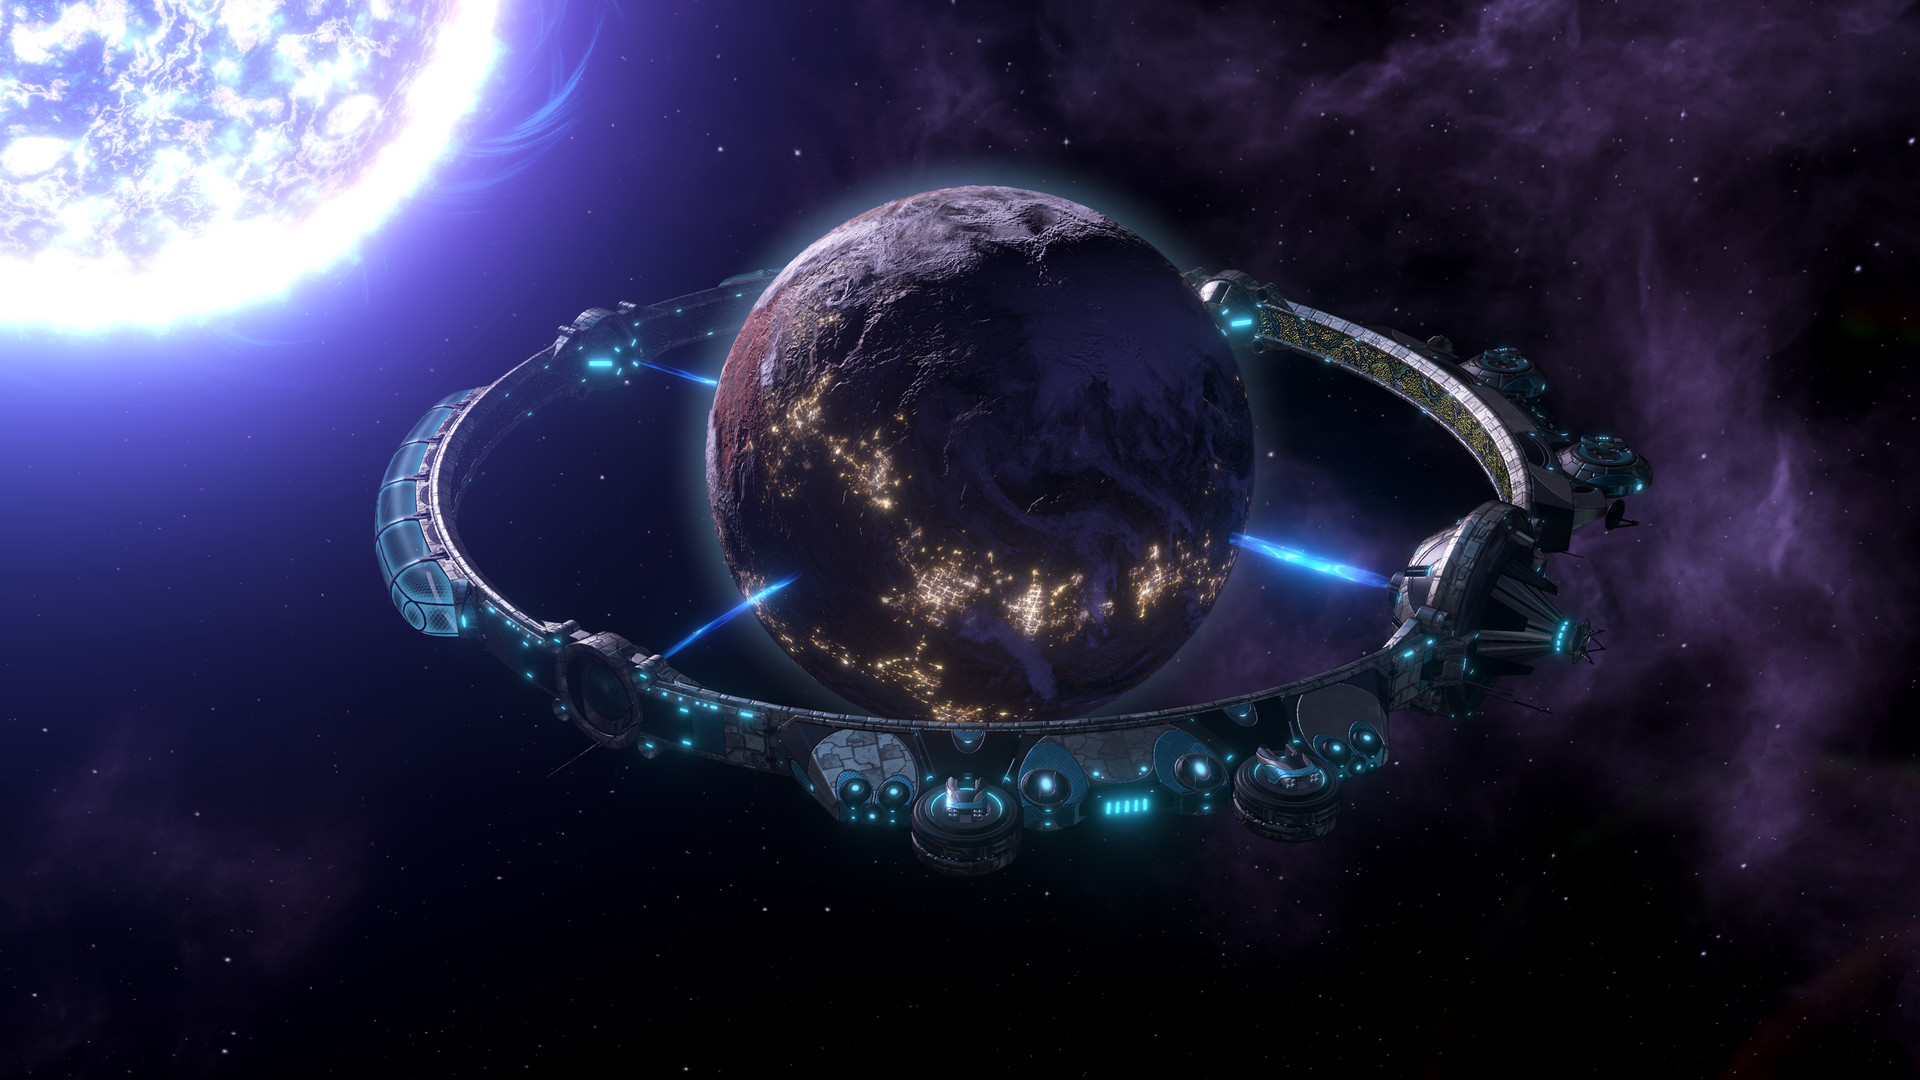 Stellaris expansion “Overlord” launches for consoles in March